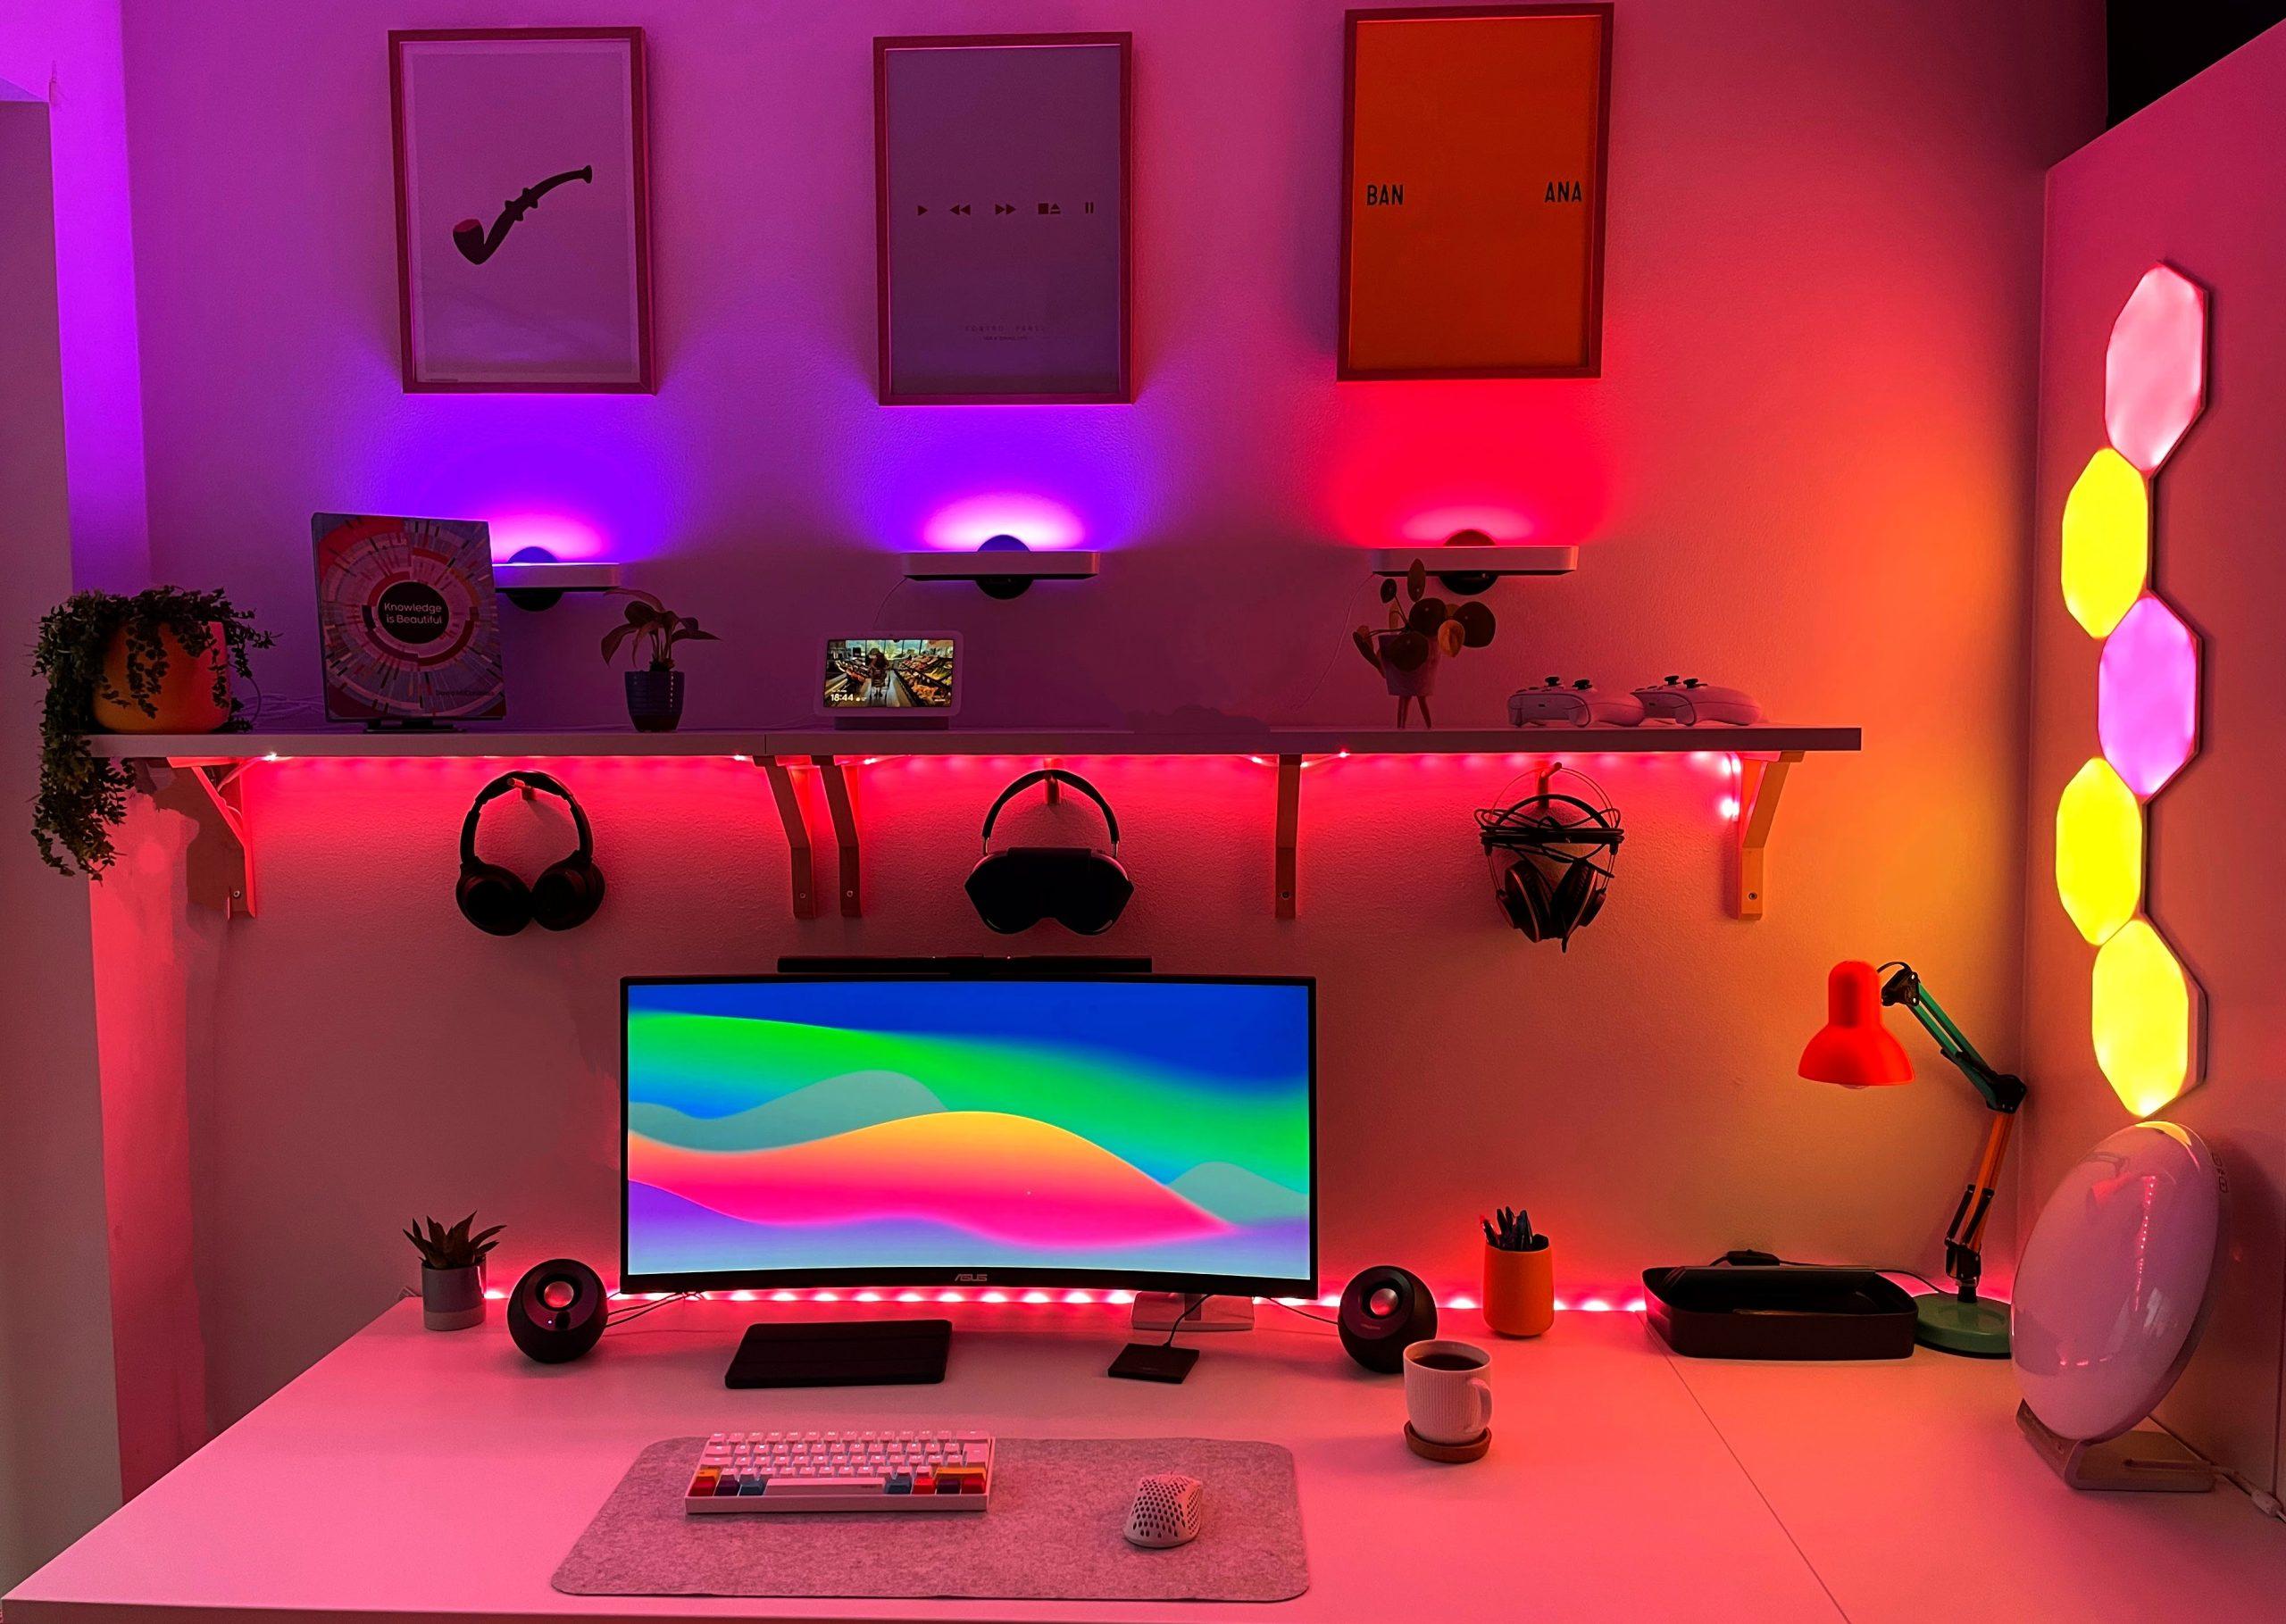 Hue vs Nanoleaf vs Govee: What is The Best Lighting for Your Gaming Room?